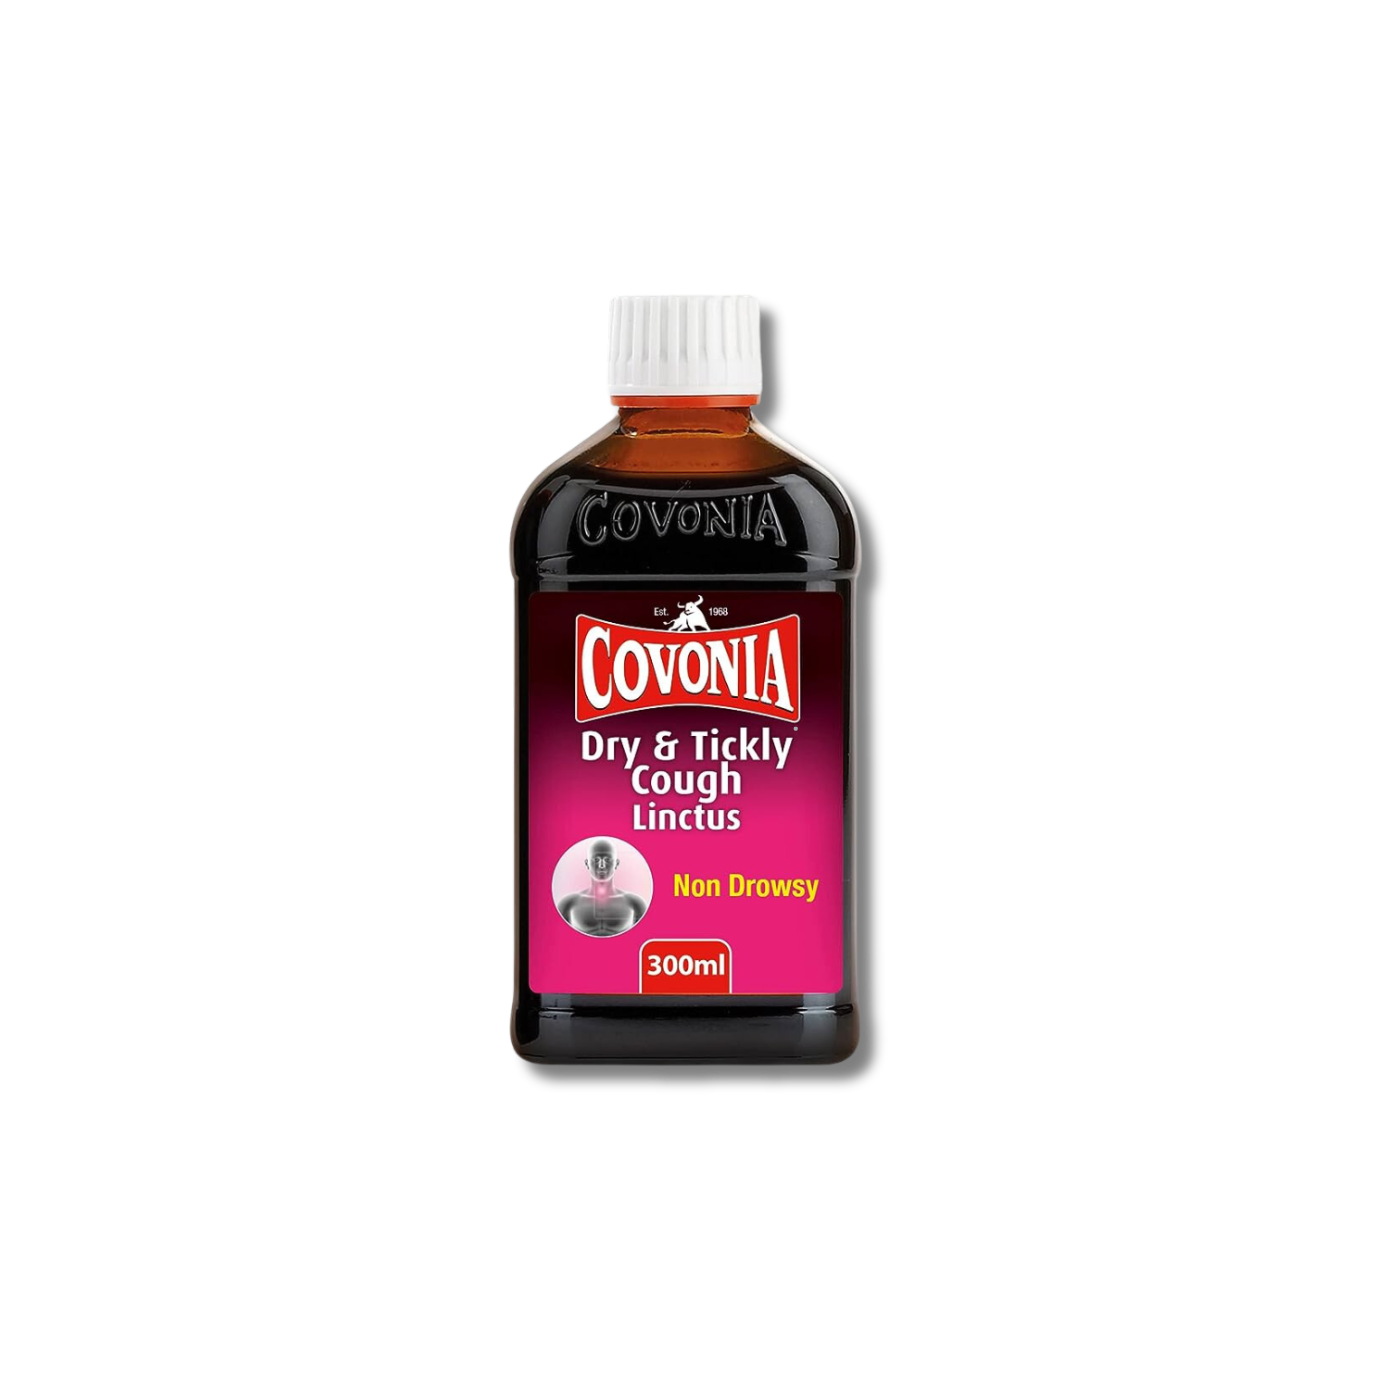 Covonia Dry & Tickly Cough Linctus - 300ml